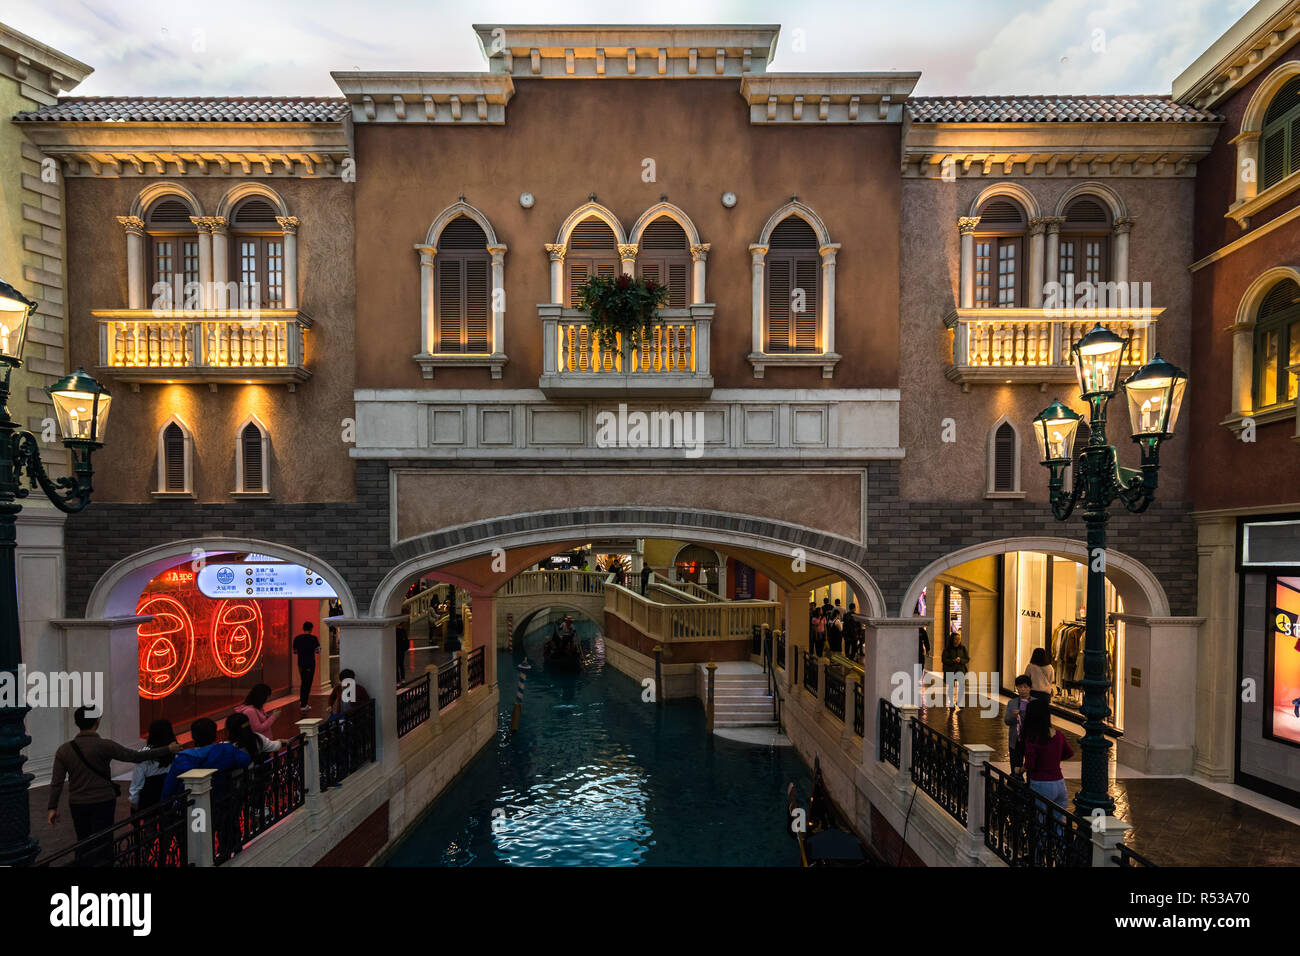 Shopping mall inside The Venetian Casino, with buildings and canals in Venice style. Macau, January 2018 Stock Photo